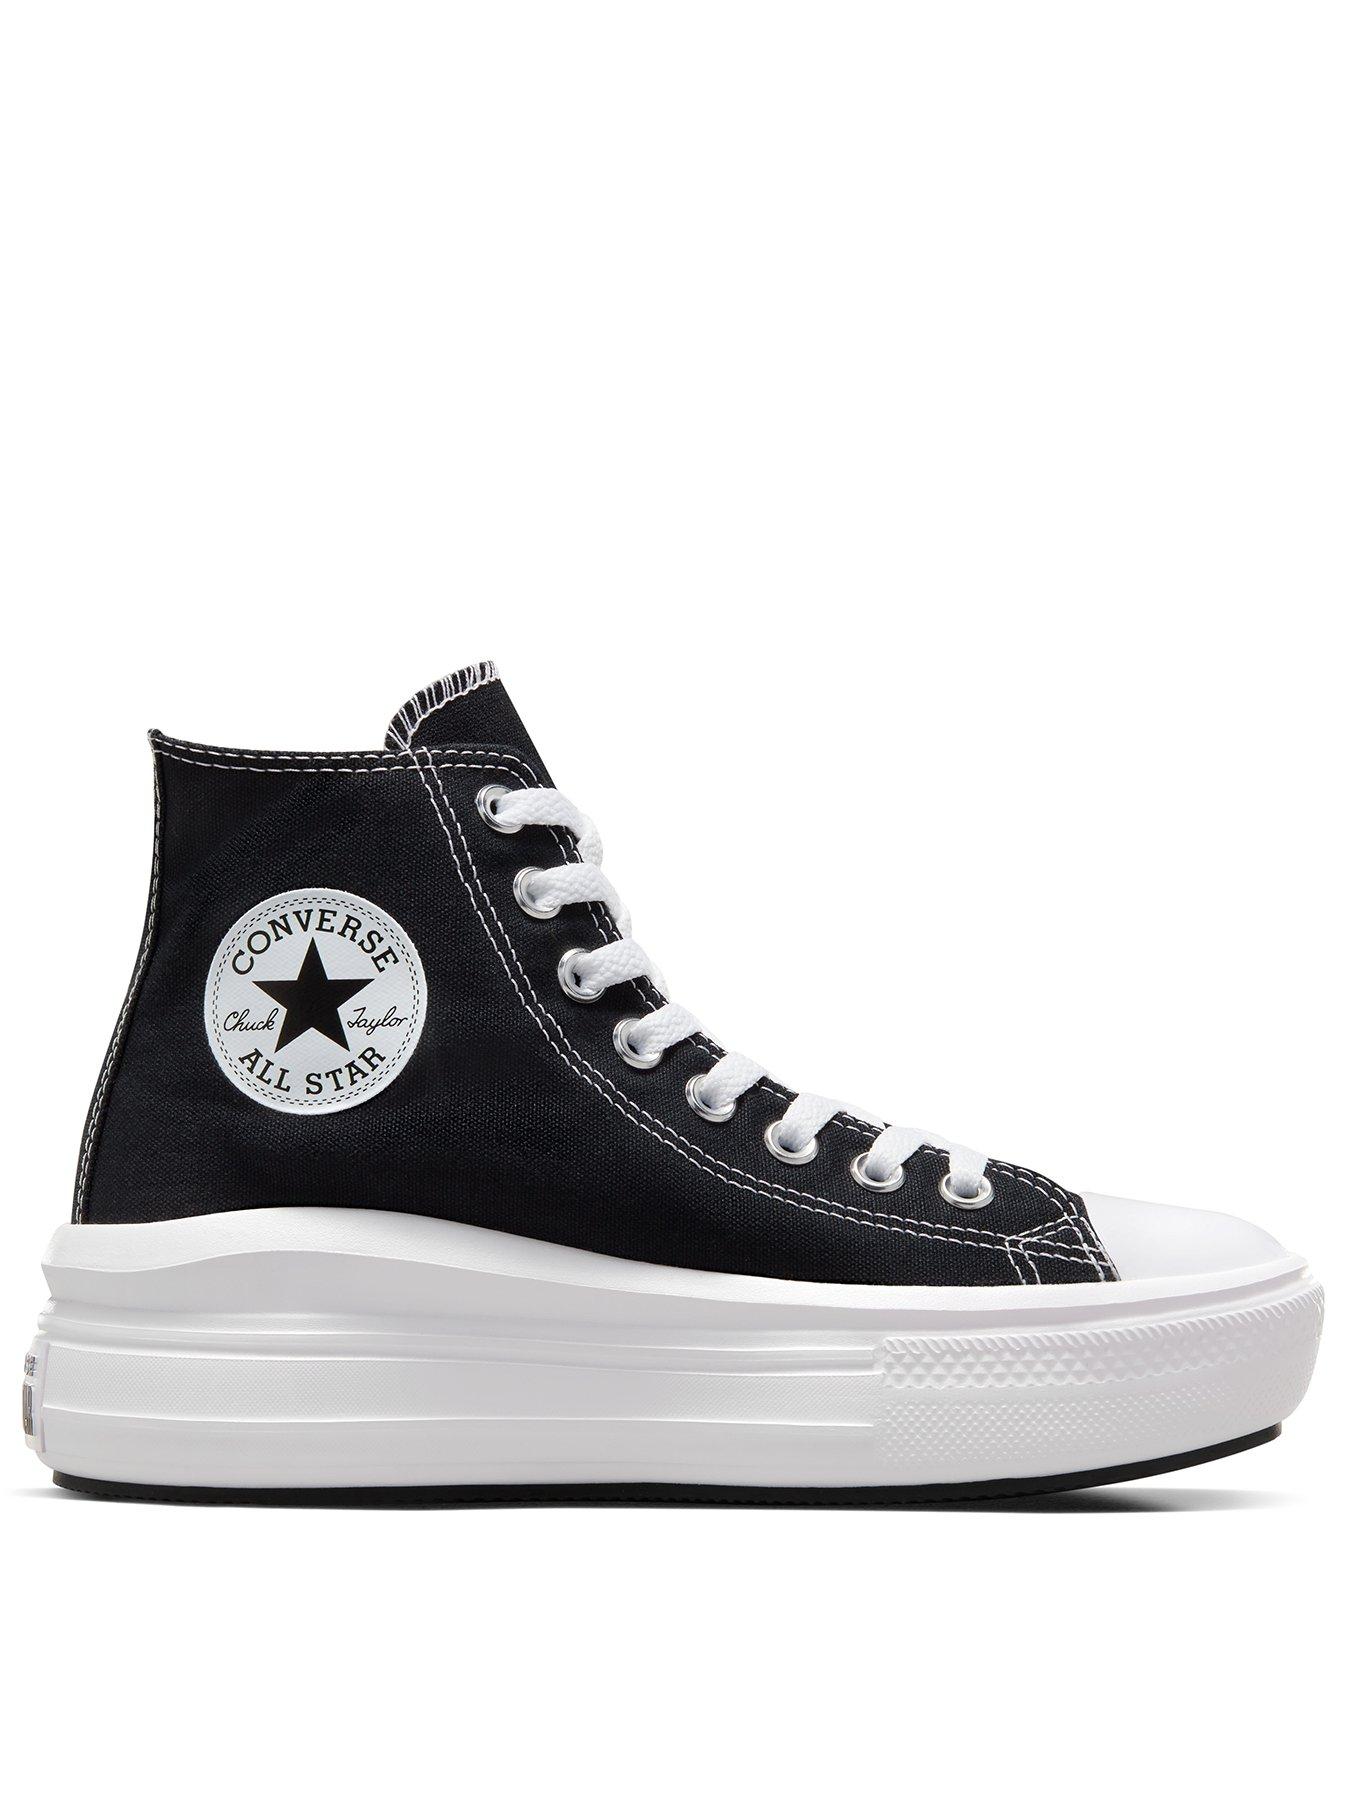 Converse Chuck Taylor All Platform Hi Trainers - Black/White very.co.uk